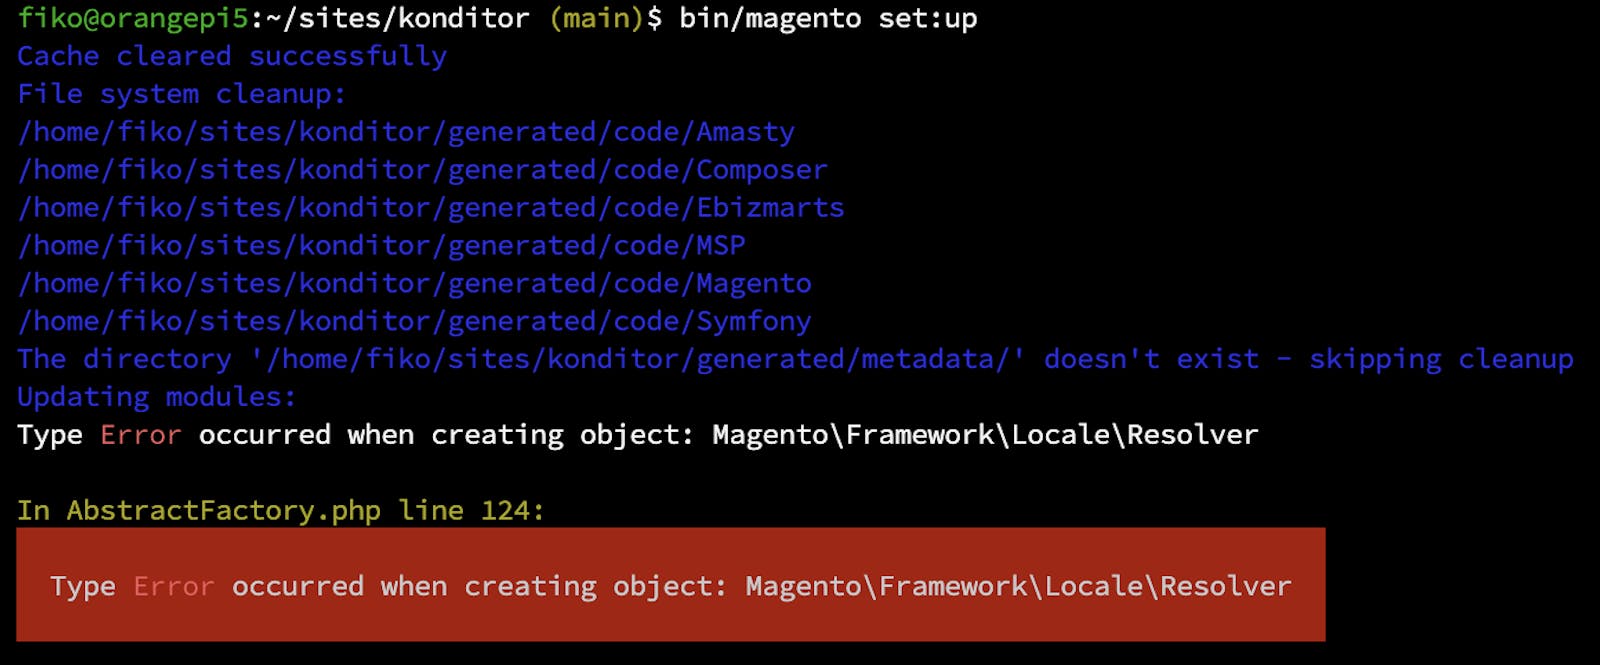 Magento 2 - Type Error occurred when creating object: Magento\Framework\Locale\Resolver